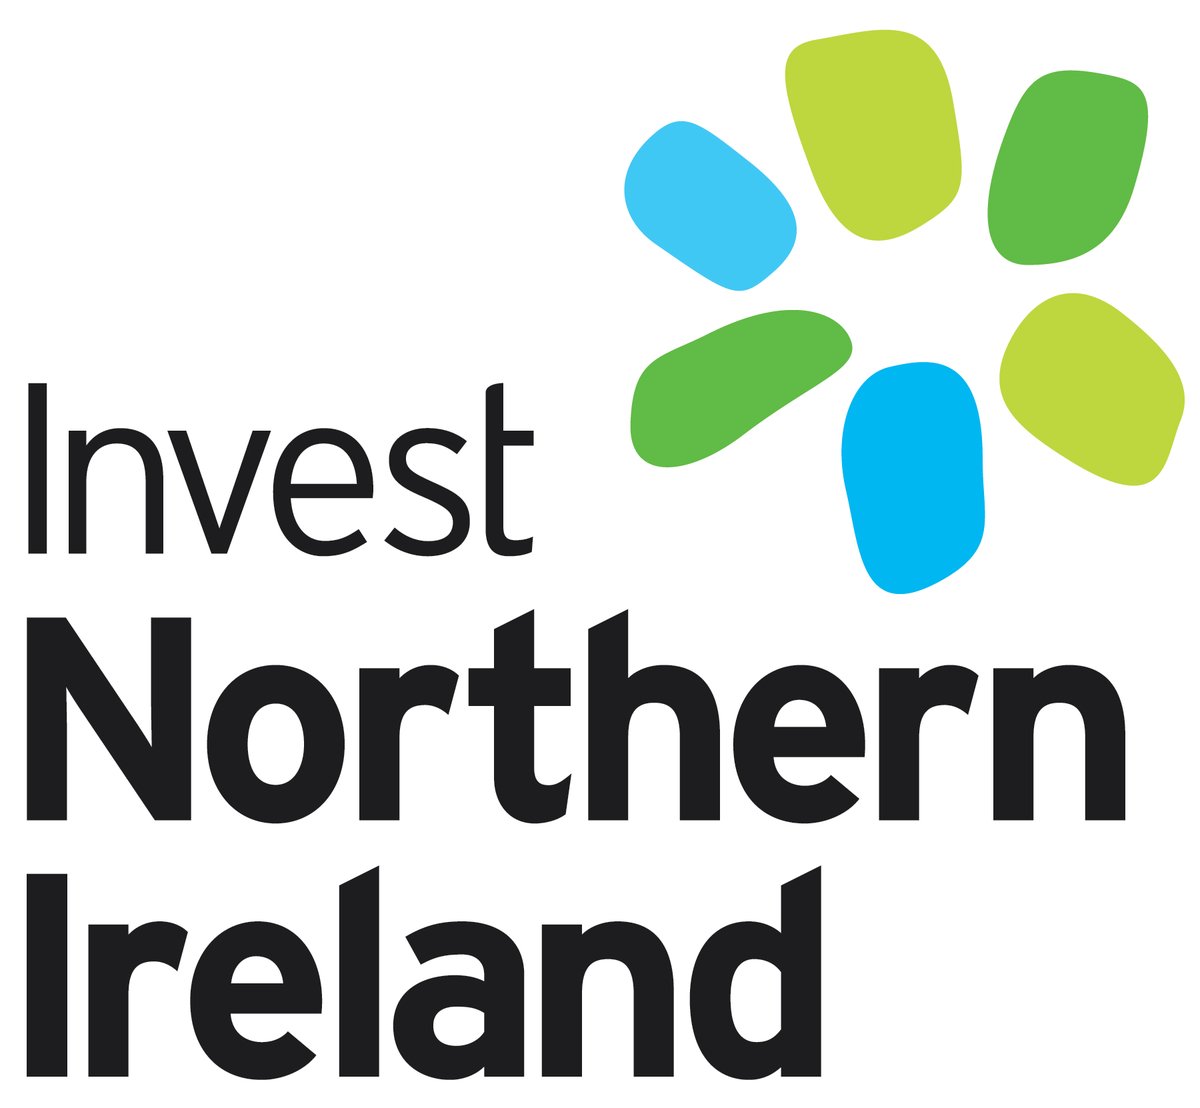 JoinHer partnering with ACSONI, are proud to announce Invest NI as an exhibitor at this year’s Black History Expo, this 25th October at St. George’s Market.
@InvestNI 

Invest NI is the regional business development agency for Northern Ireland, our role is to grow (1/2)